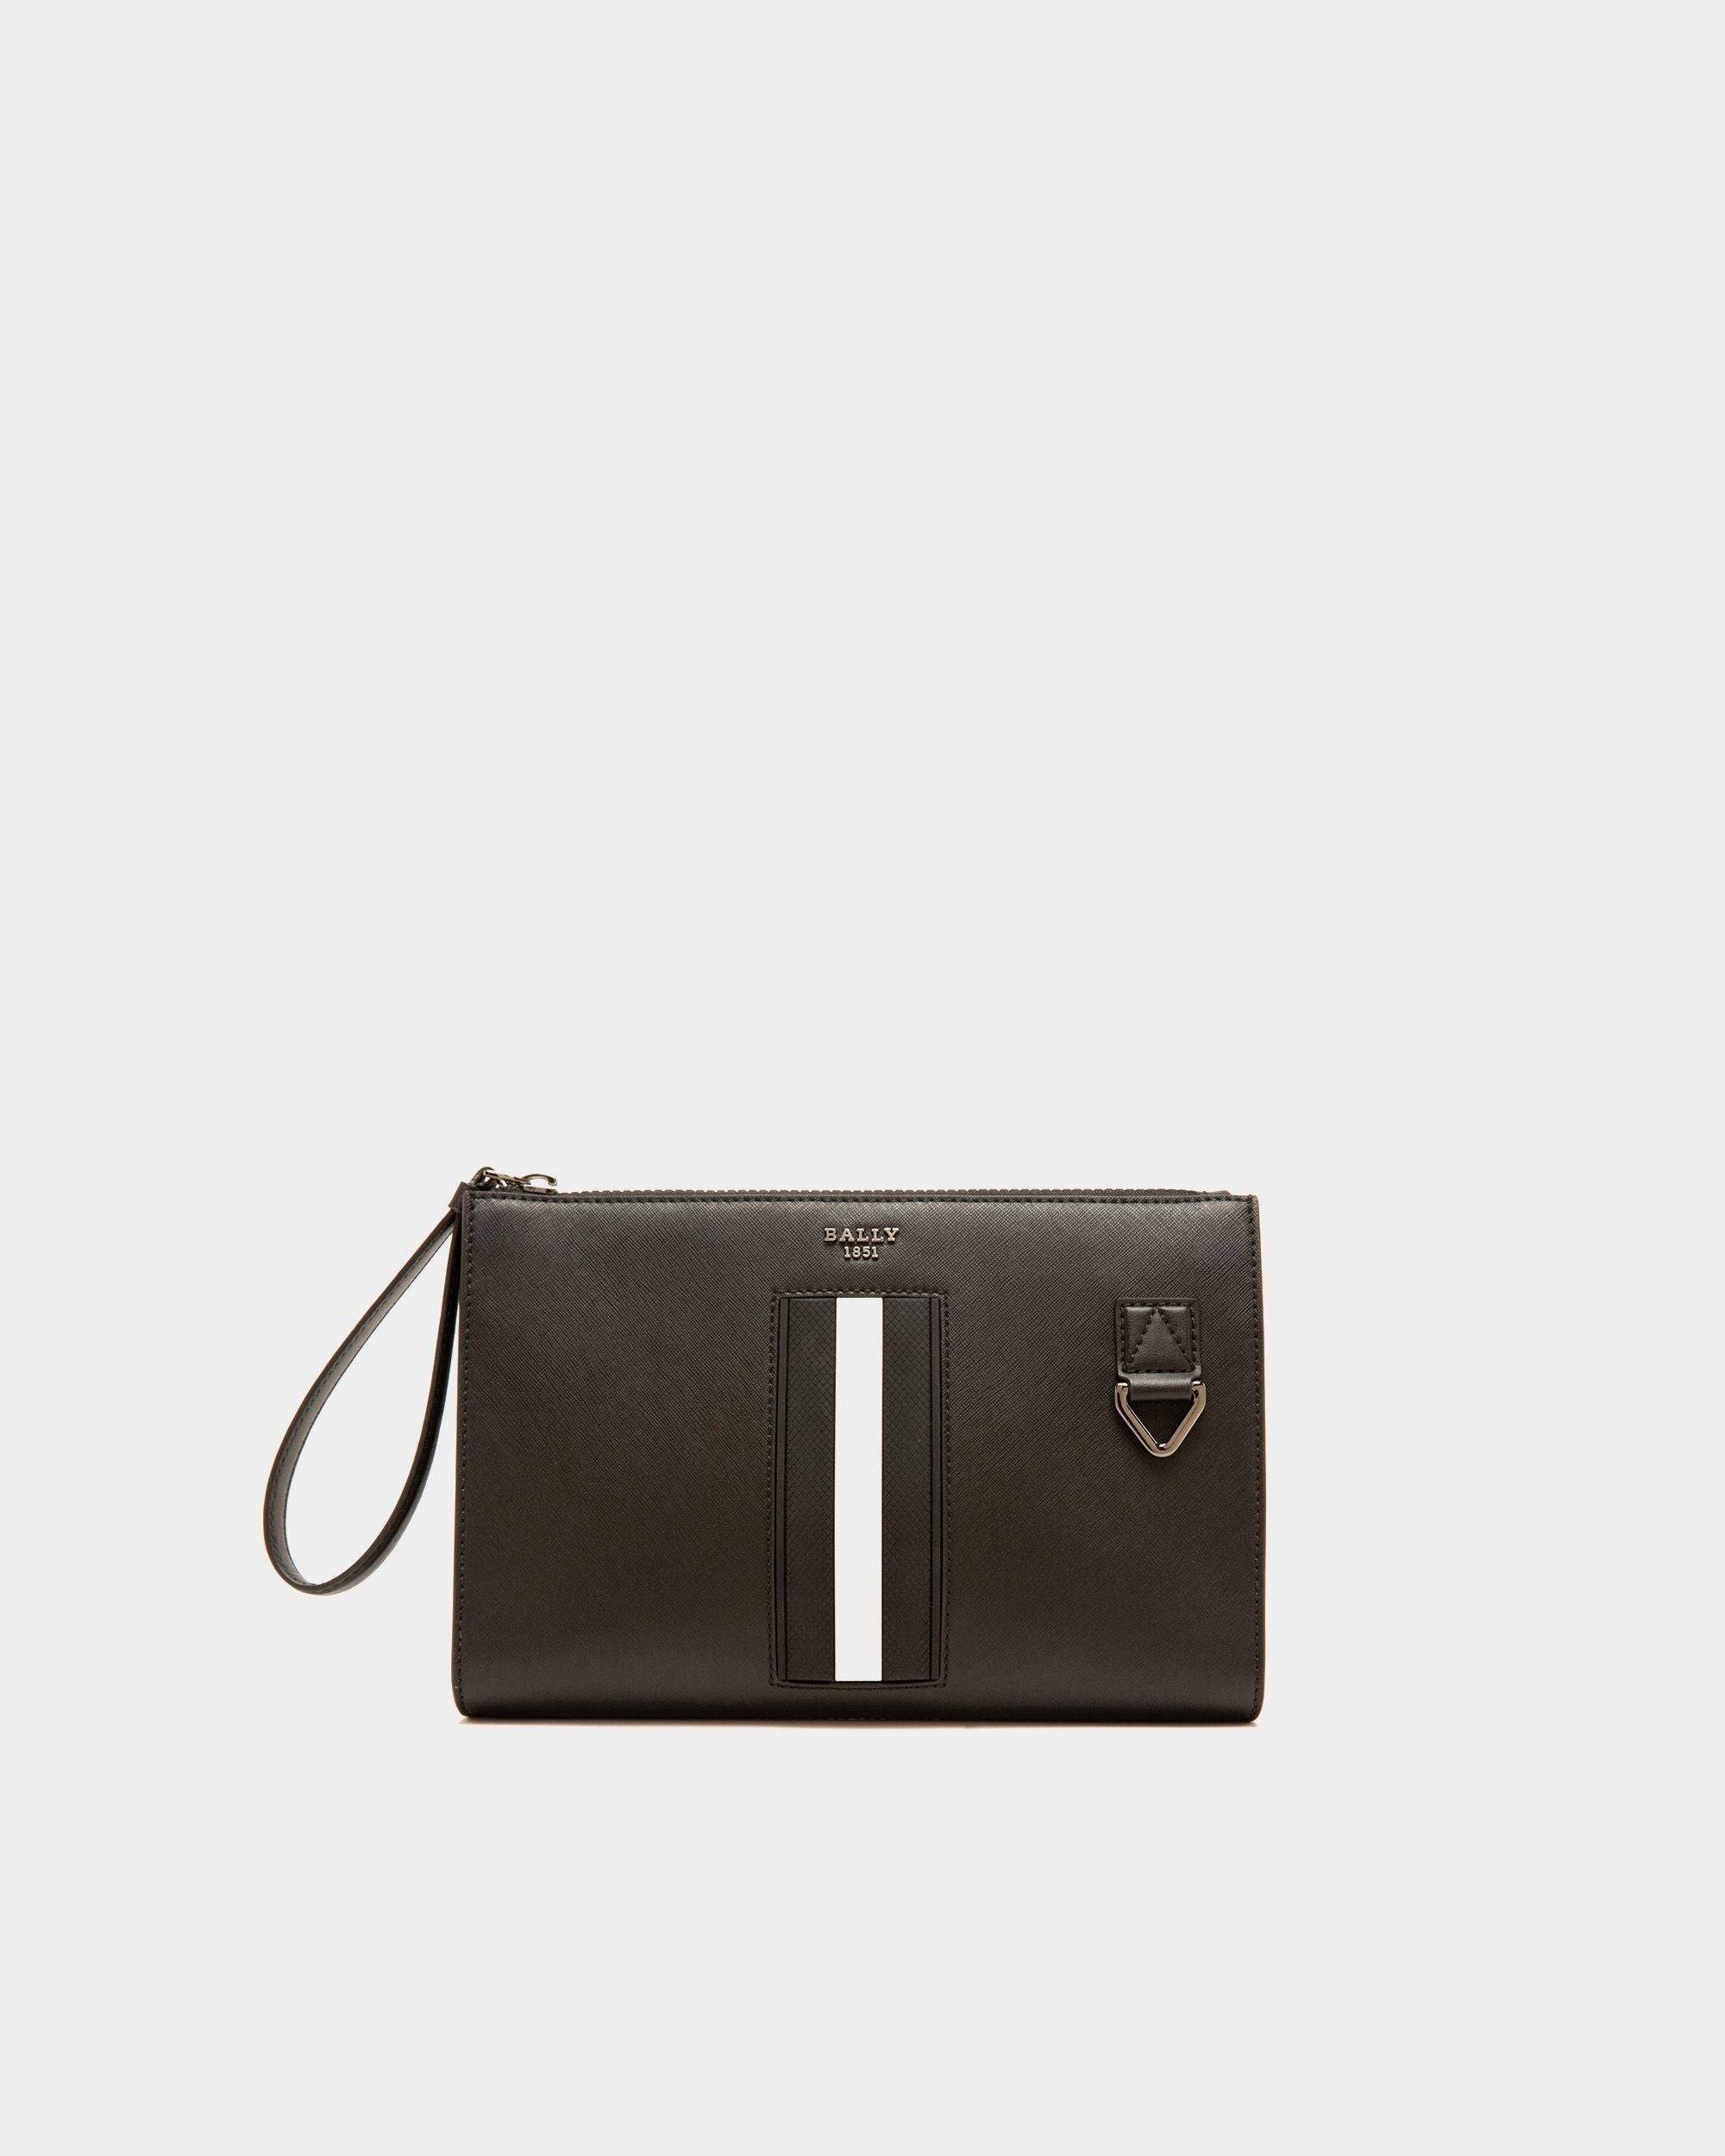 Makid | Men's Clutch | Black Leather | Bally | Still Life Front